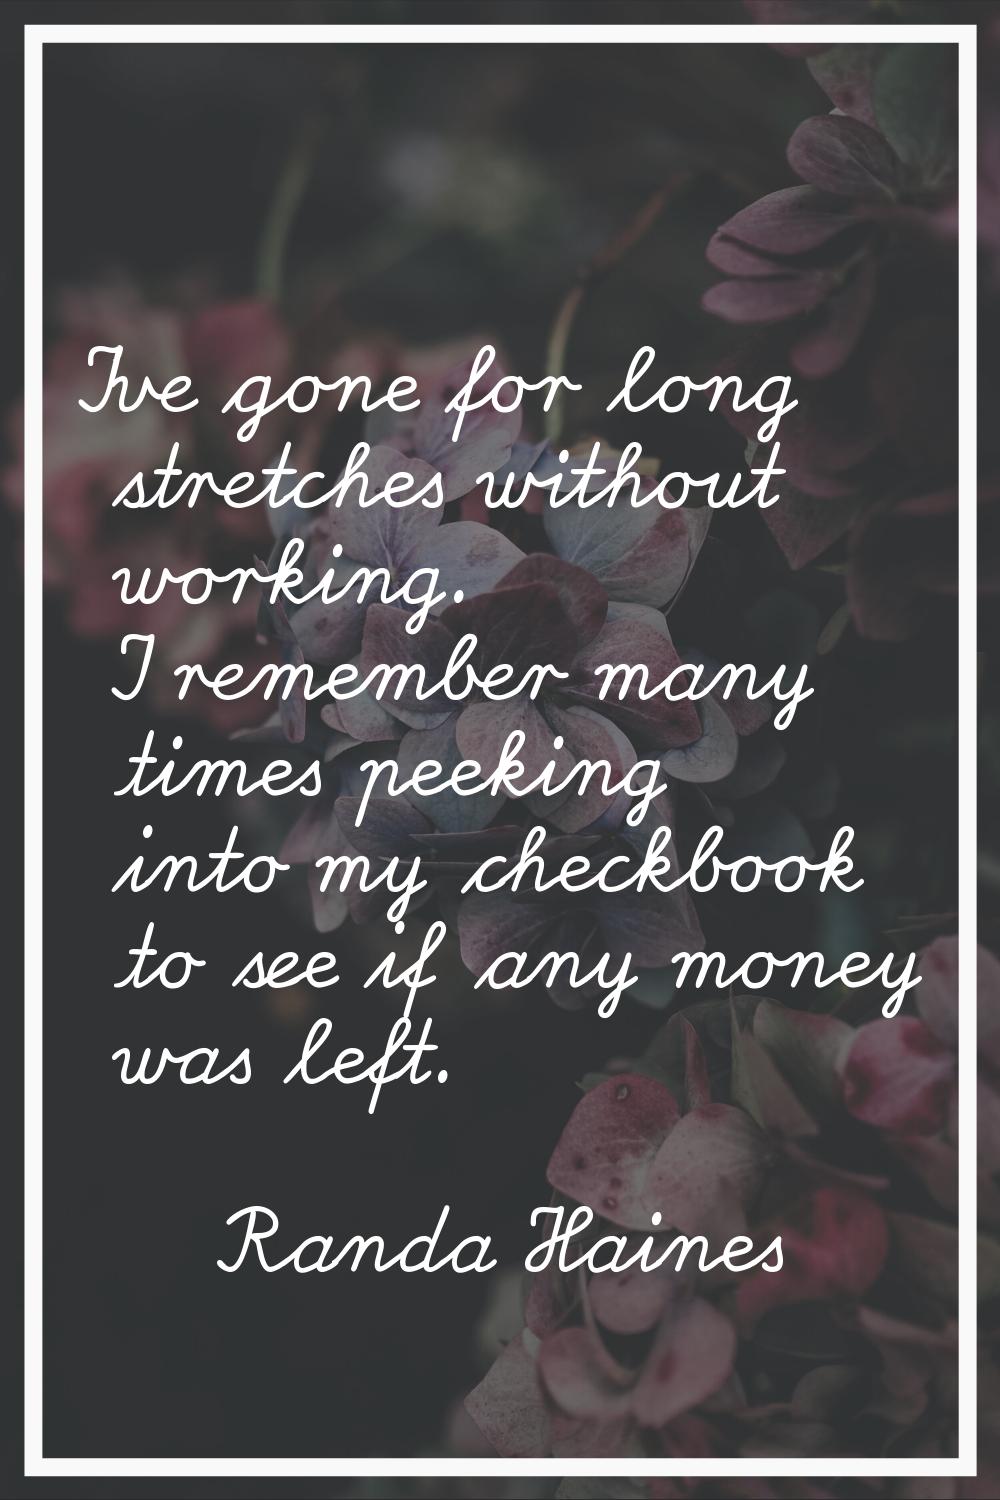 I've gone for long stretches without working. I remember many times peeking into my checkbook to se